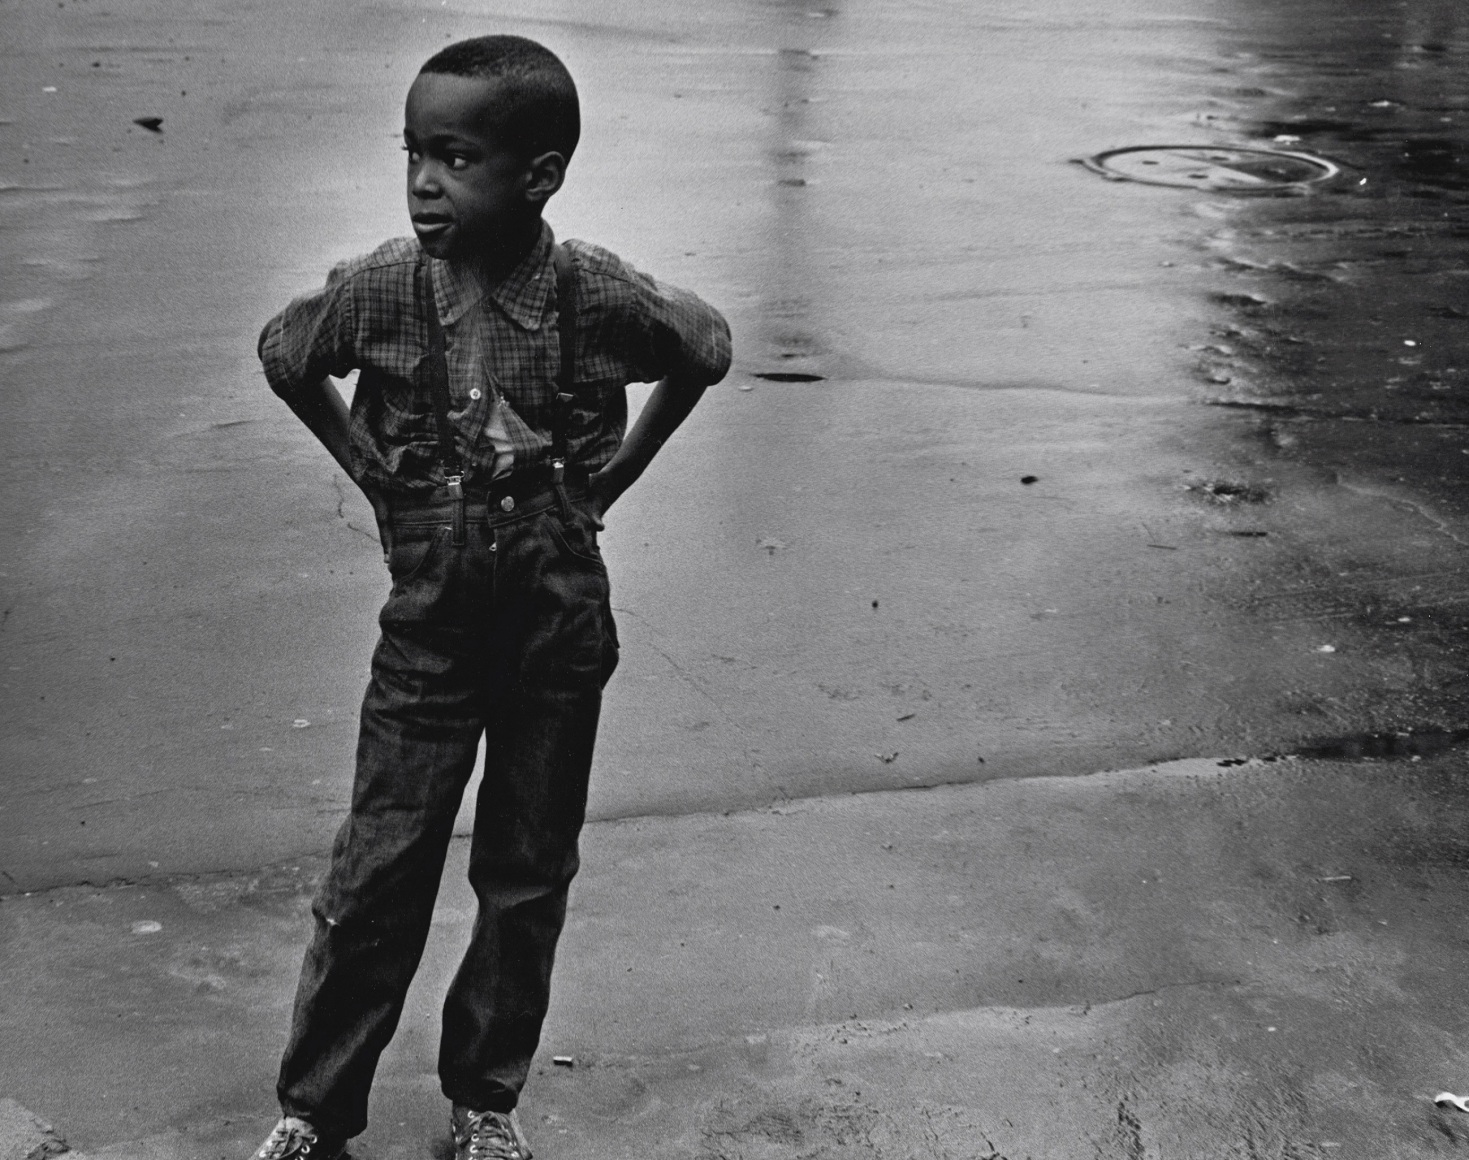 29. Beuford Smith, Boy in Street, Brooklyn, 1969. A young boy in suspenders stand with hands on hips on wet pavement, looking to the left of the frame.